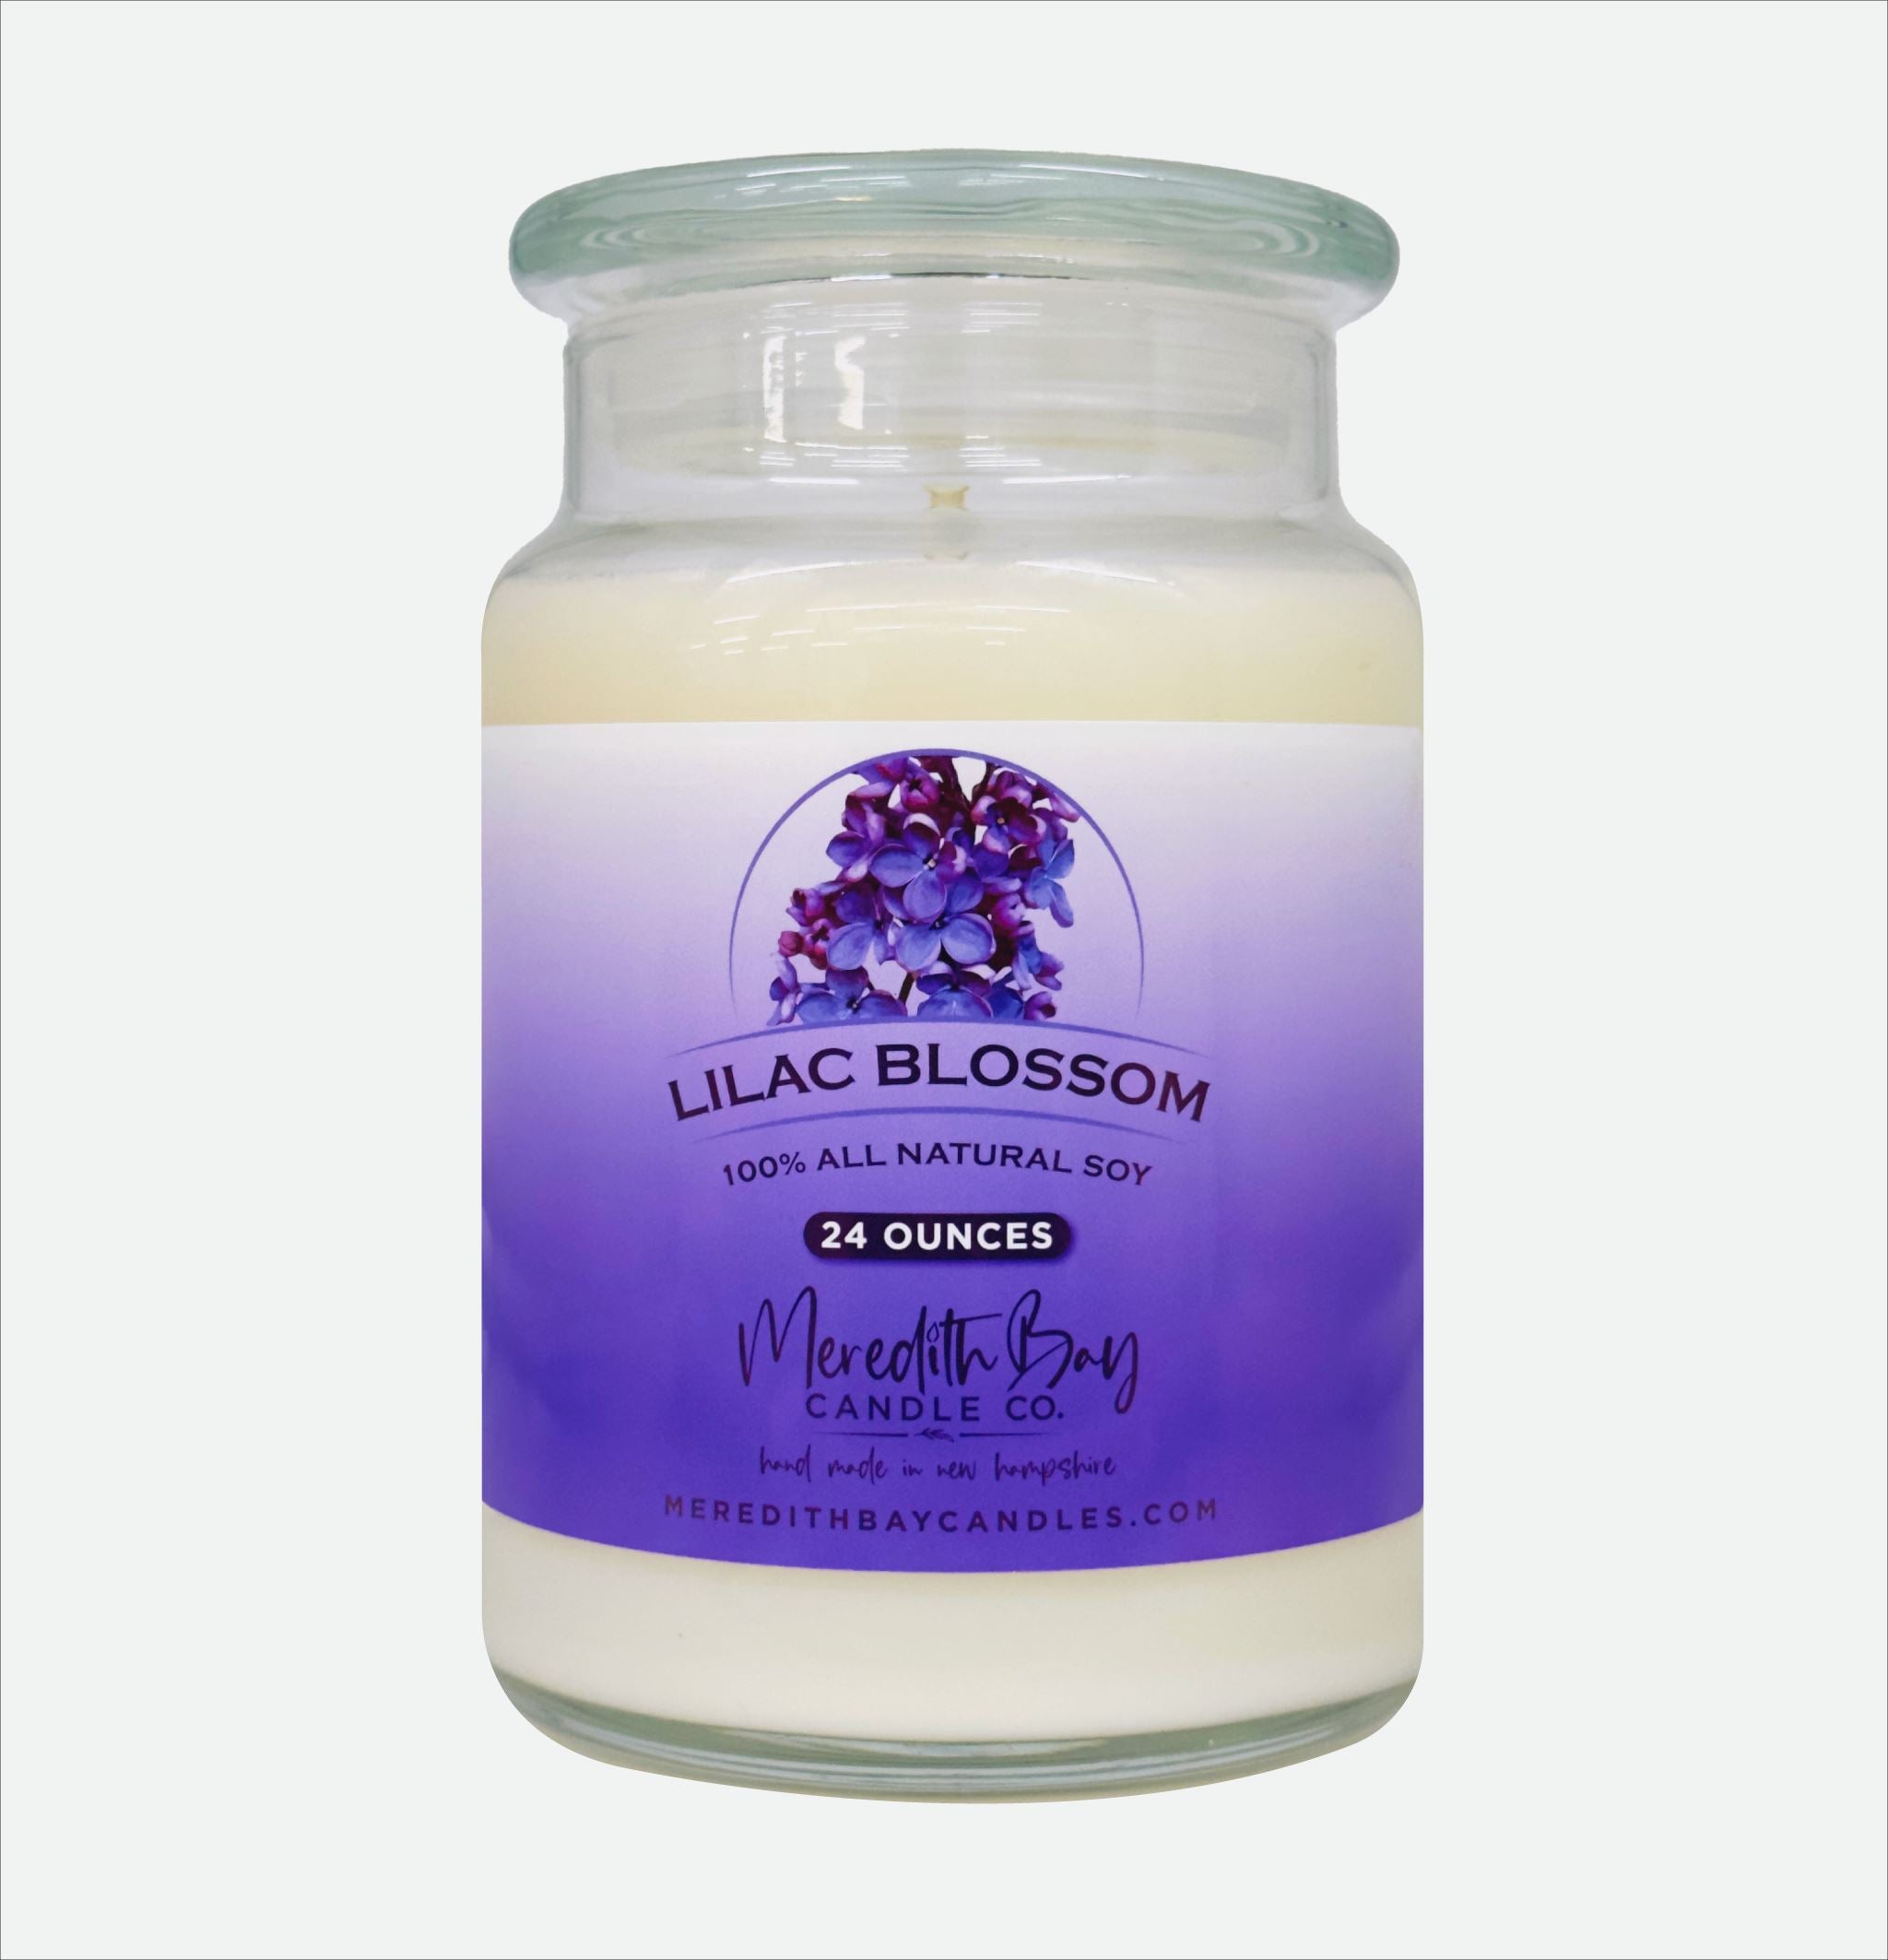 Lilac Blossom Soy Candle Meredith Bay Candle Co 24 Oz 